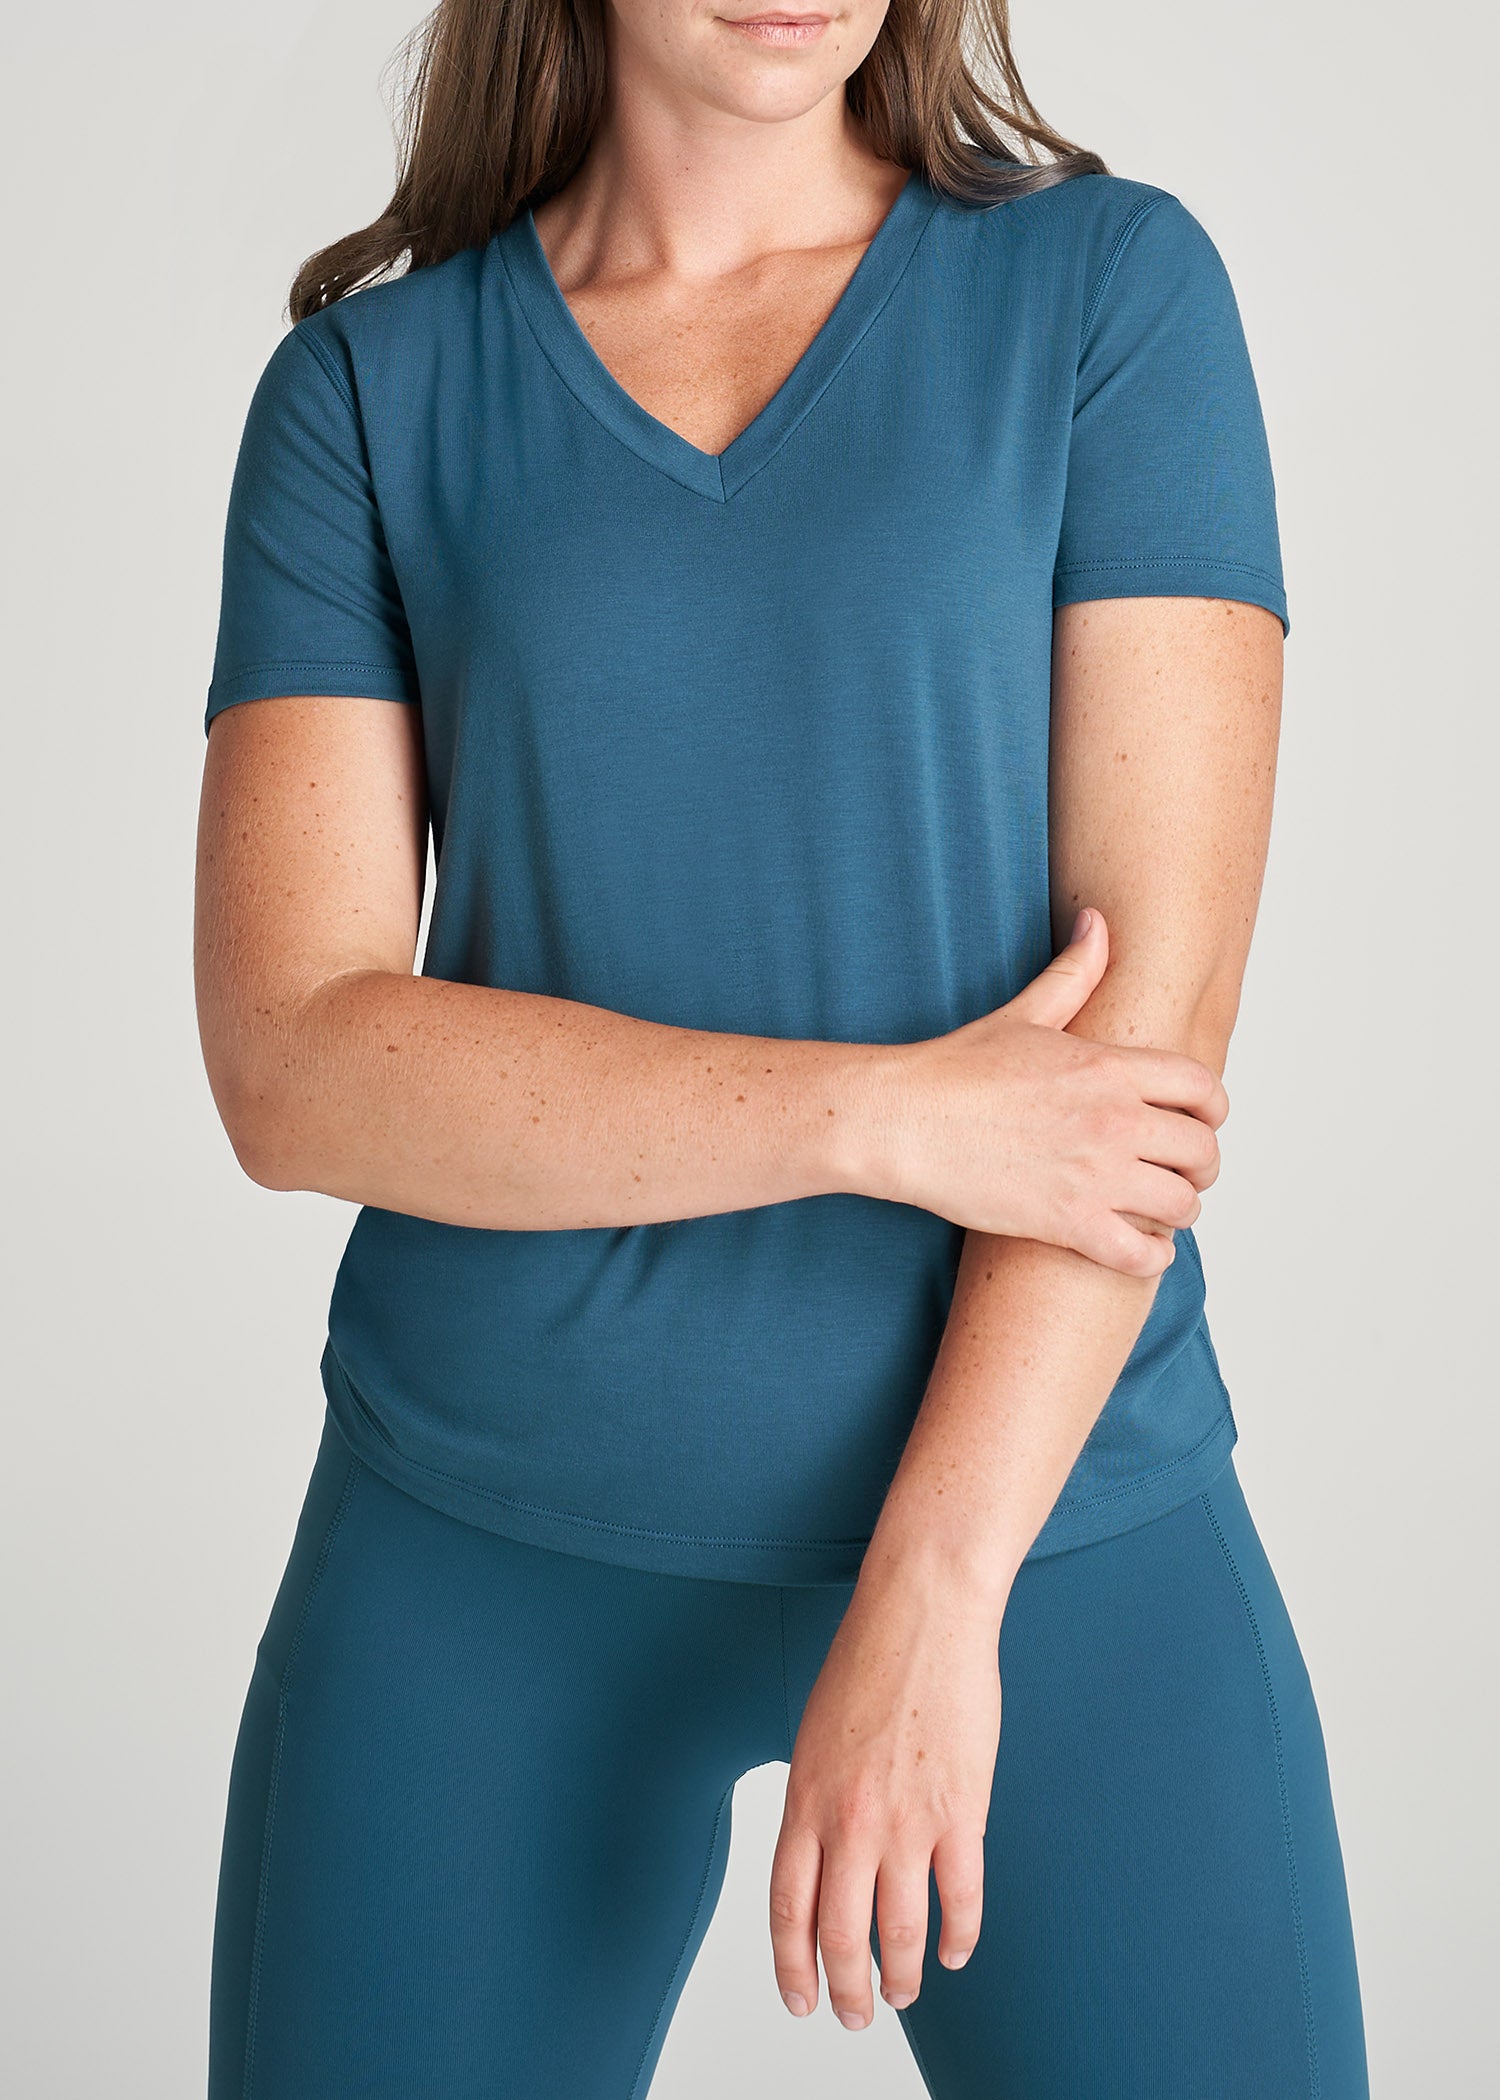 Short Sleeve V-Neck in Deep Water - Shirts for Tall Women